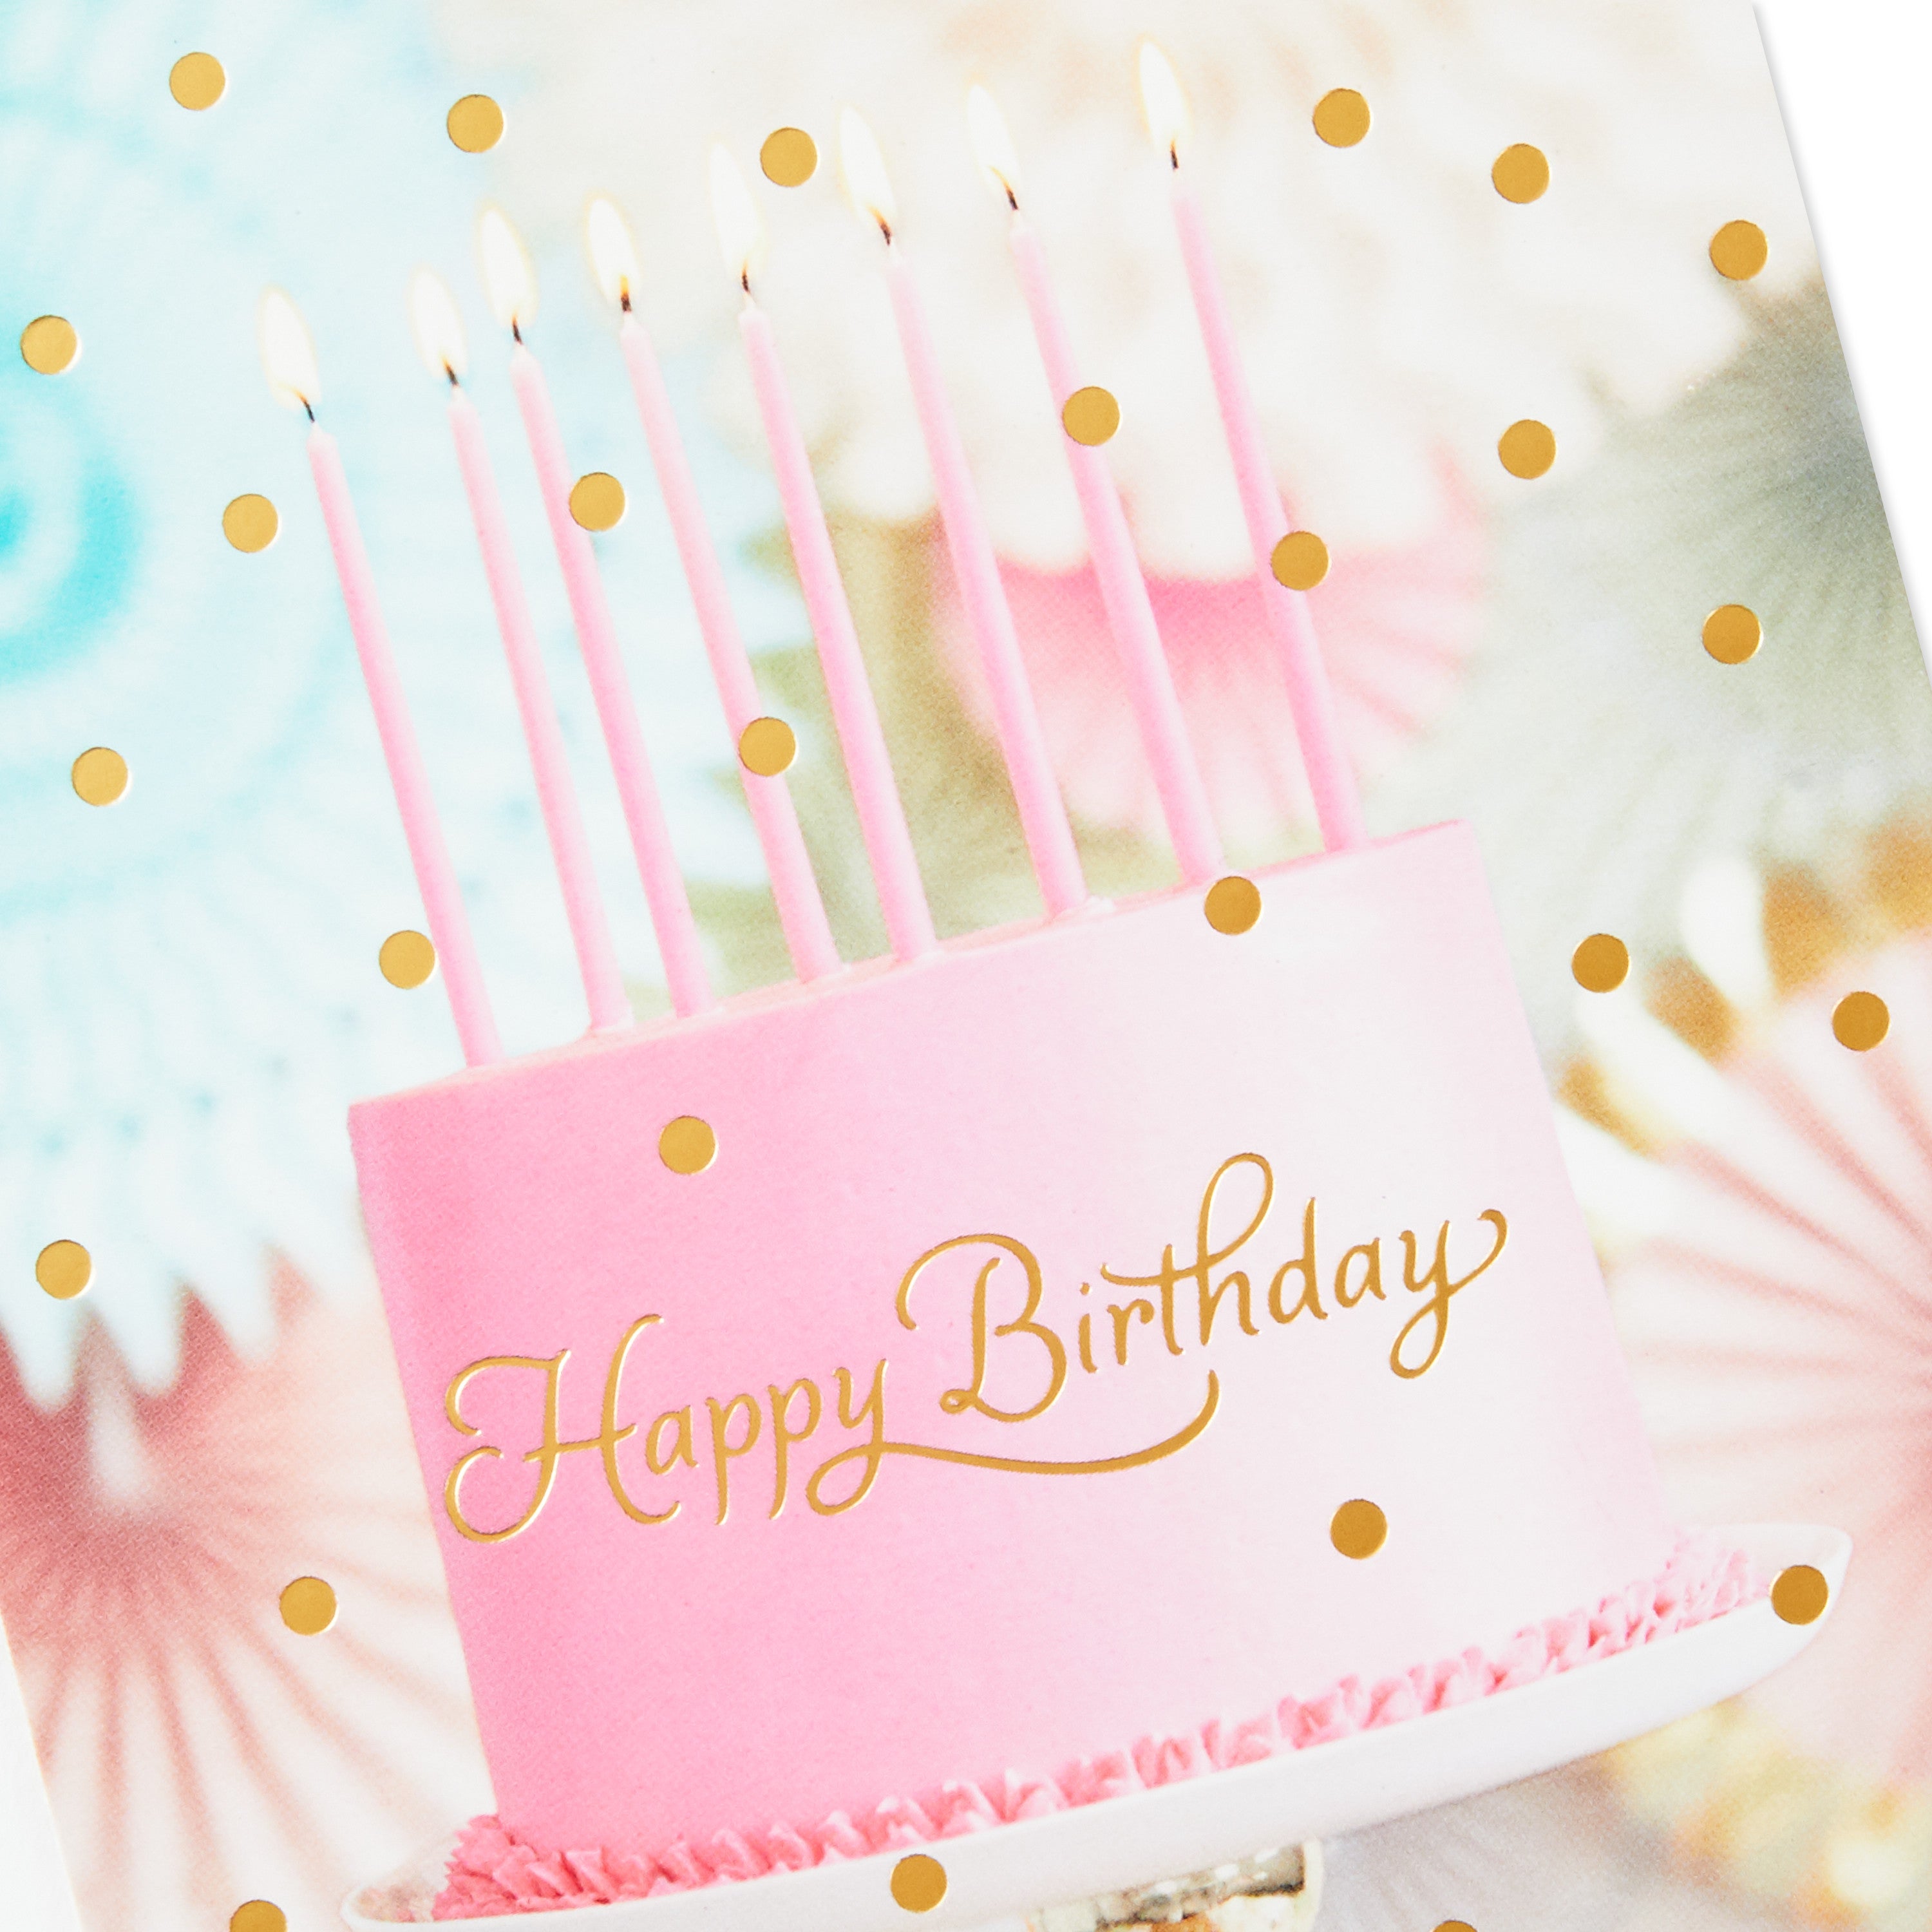 All Occasion Cards Assortment—48 Cards with Envelopes (Birthday, Thank You, Congrats, Sympathy, Baby Shower, Blank)